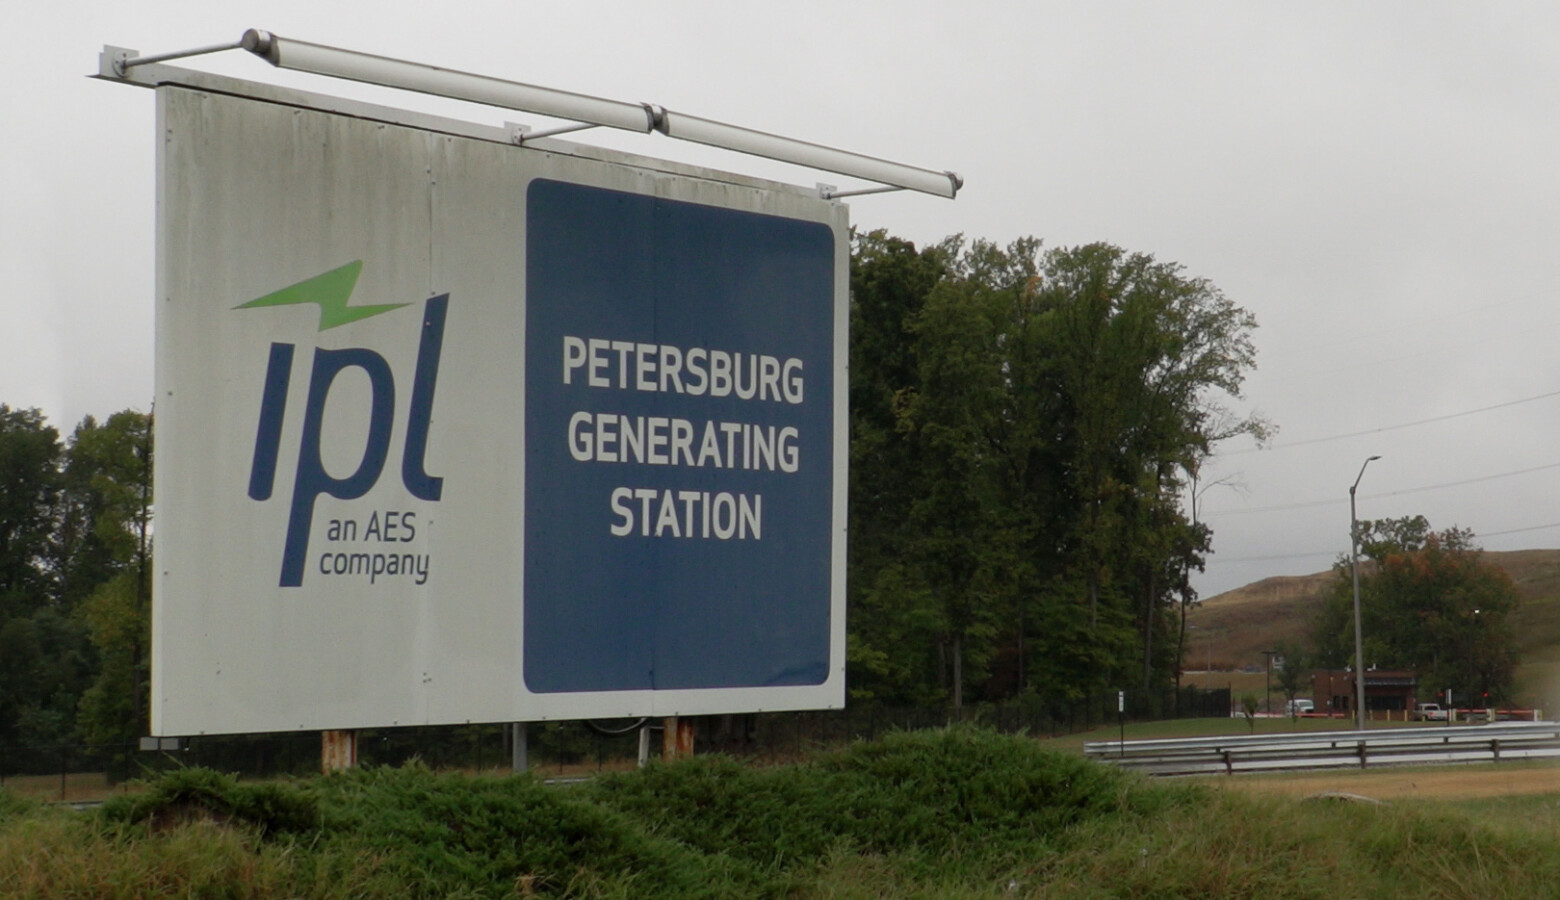 The task force is trying to figure out how to pay for the remaining costs associated with coal plants that retire early. Indianapolis Power & Light will retire some units at the Petersburg coal plant earlier than planned. (Alan Mbathi/IPB News)